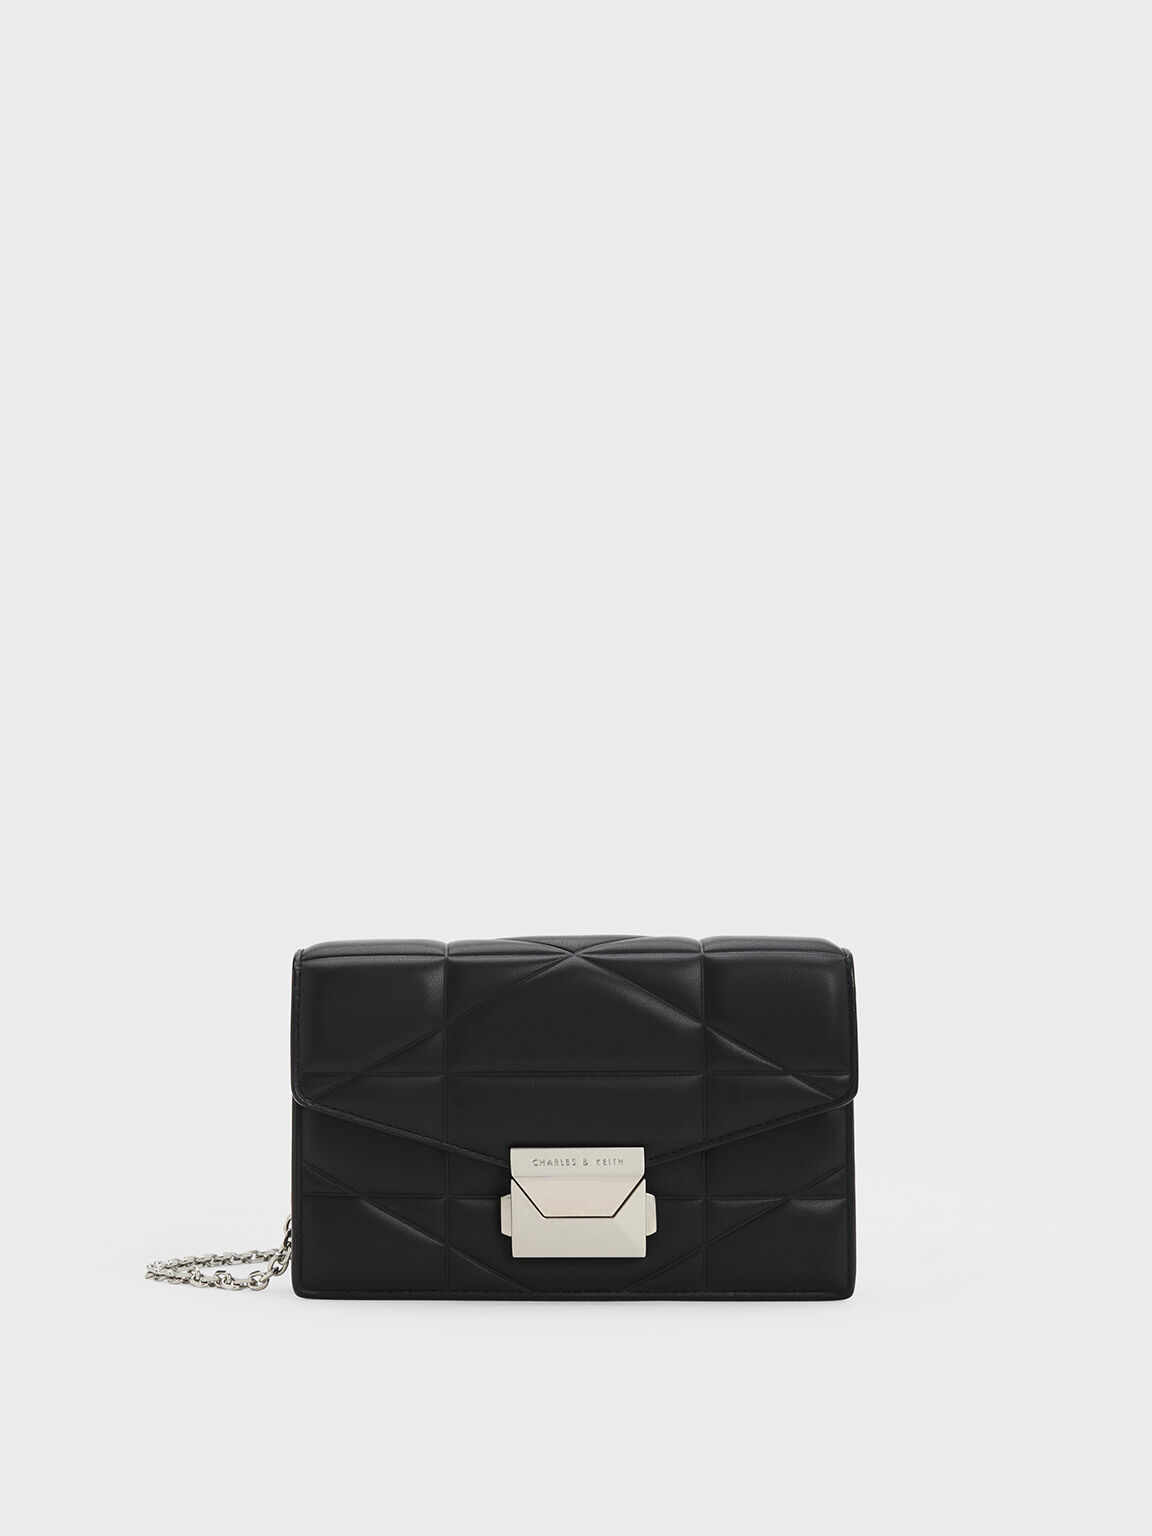 Black Quilted Chain Strap Bag - CHARLES & KEITH US